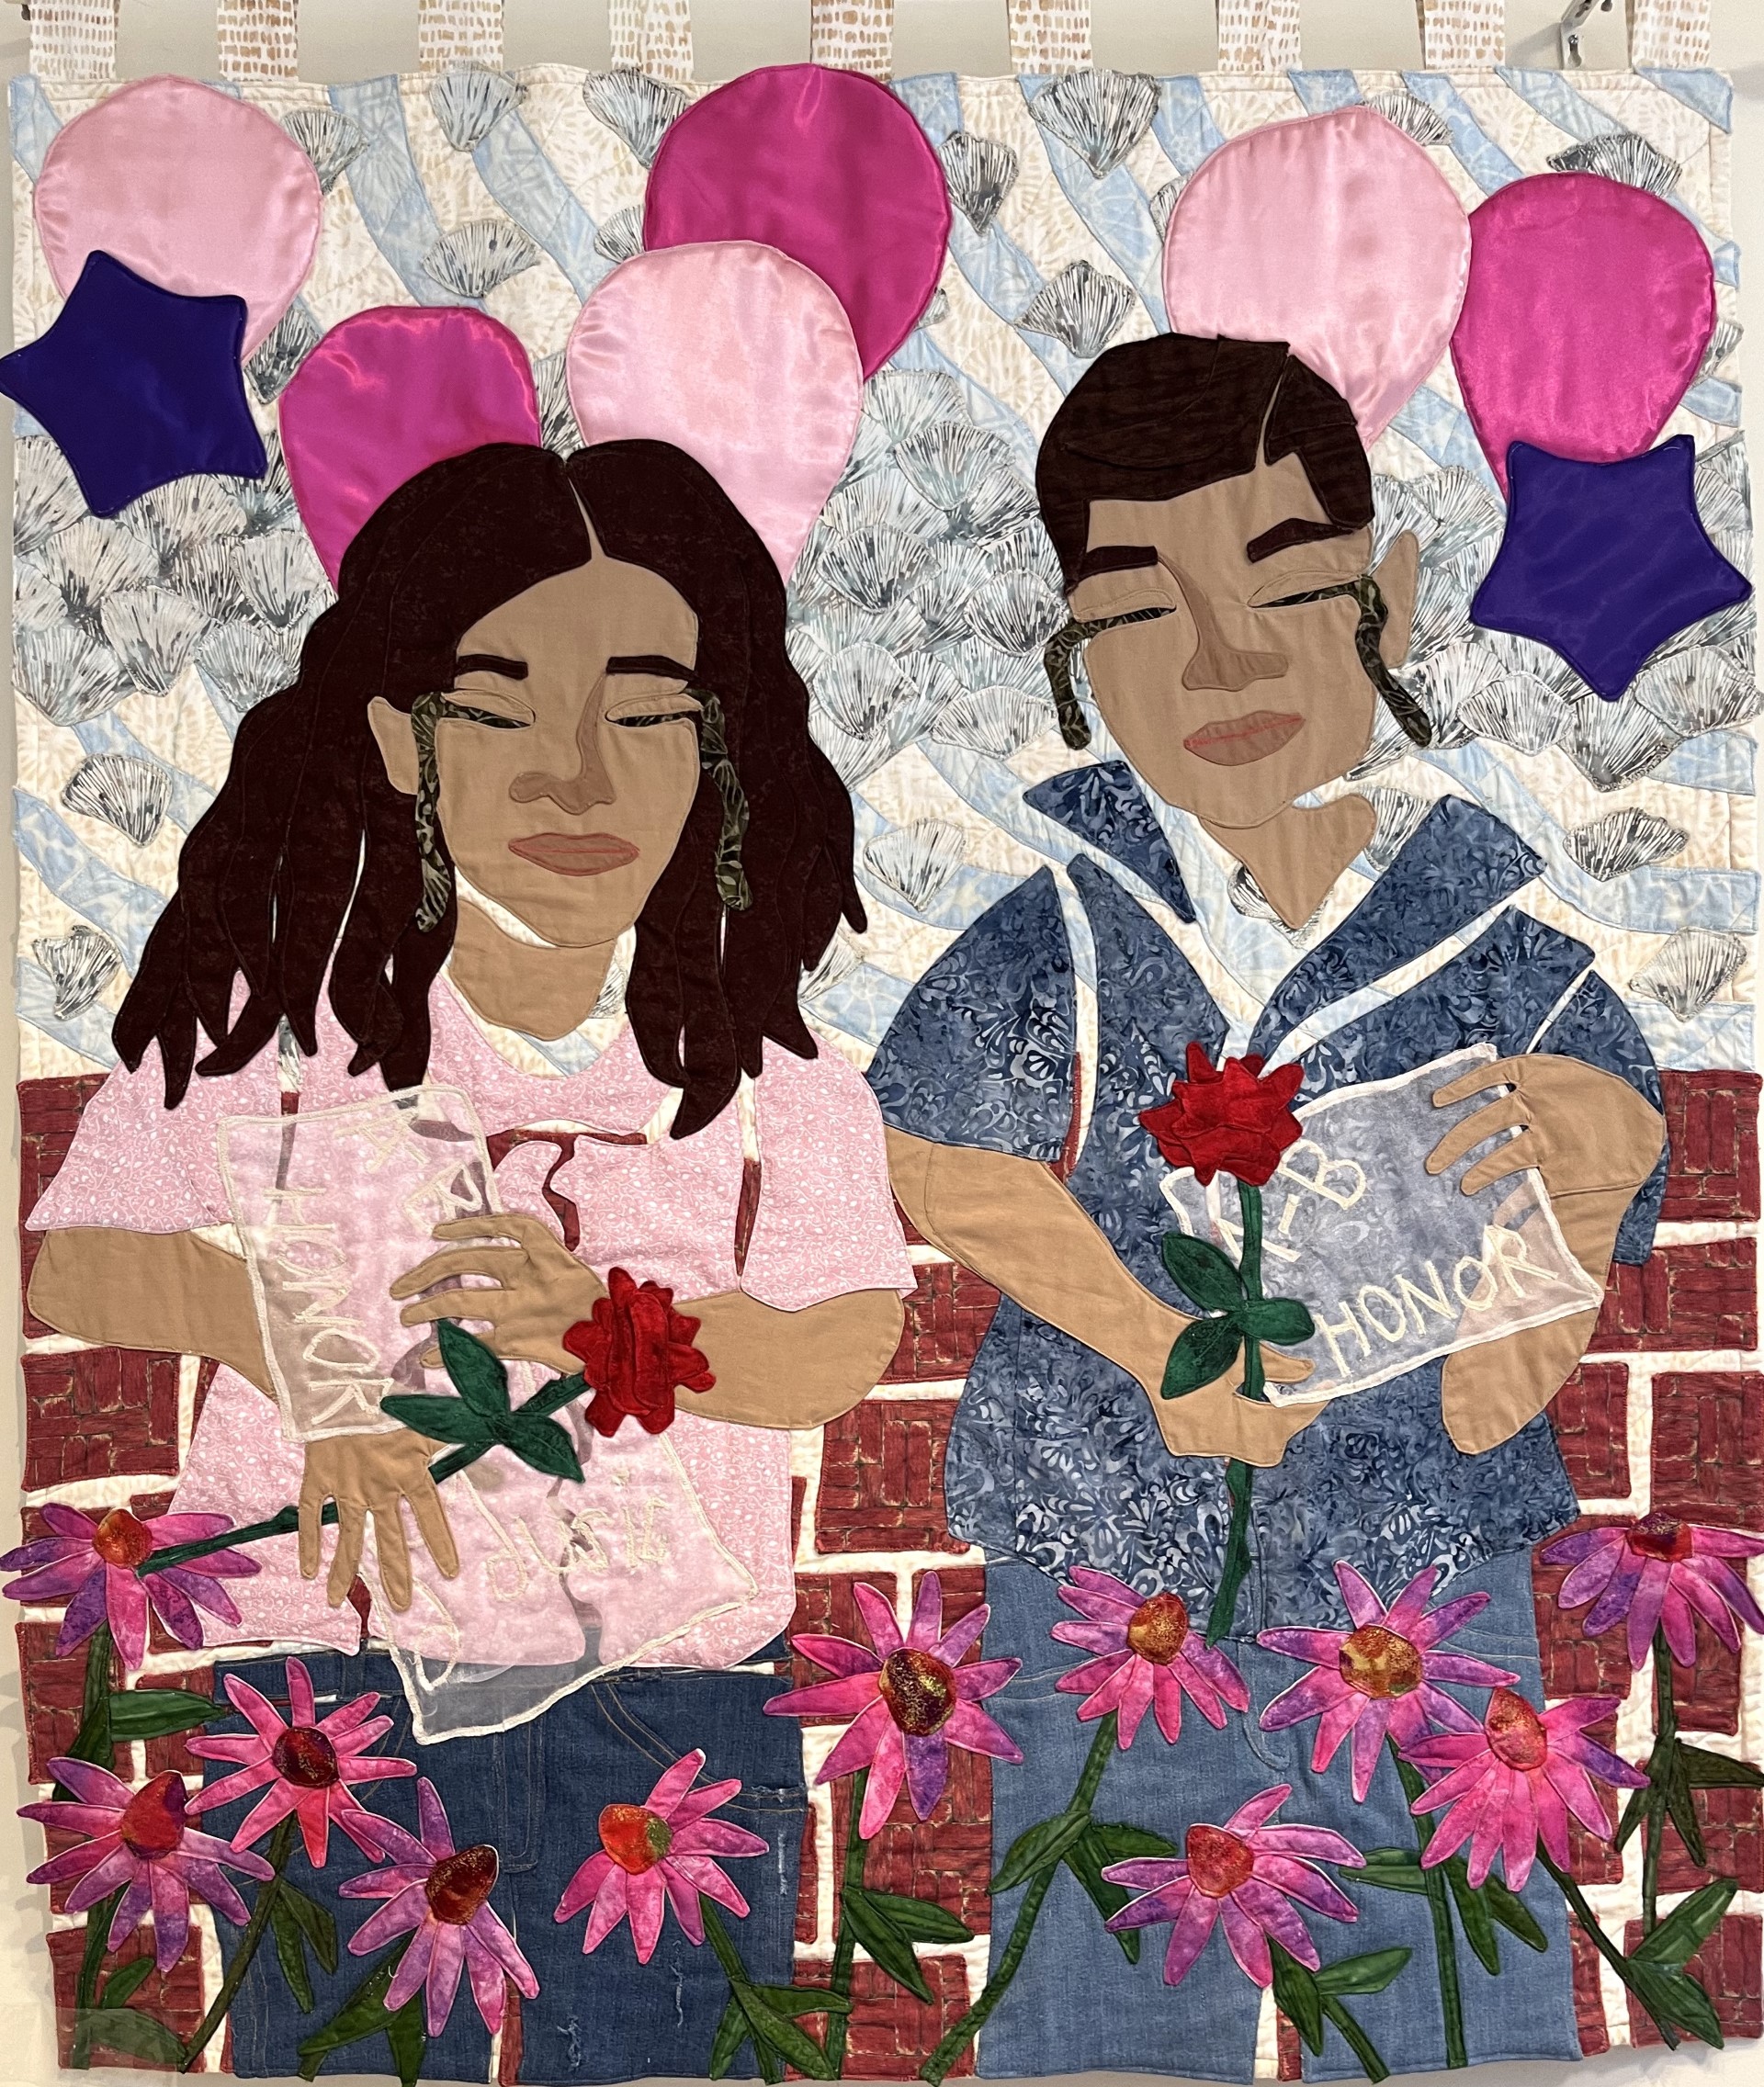 Annabell and Xavier, Uvalde, Texas
Stitched fabric
51″ x 43″
2022
NFS
Annabell Guadalupe Rodriquez and Xavier Lopez died together in Uvalde, Texas. Annabell's Aunt recalled how she had noticed a boy in her class who 